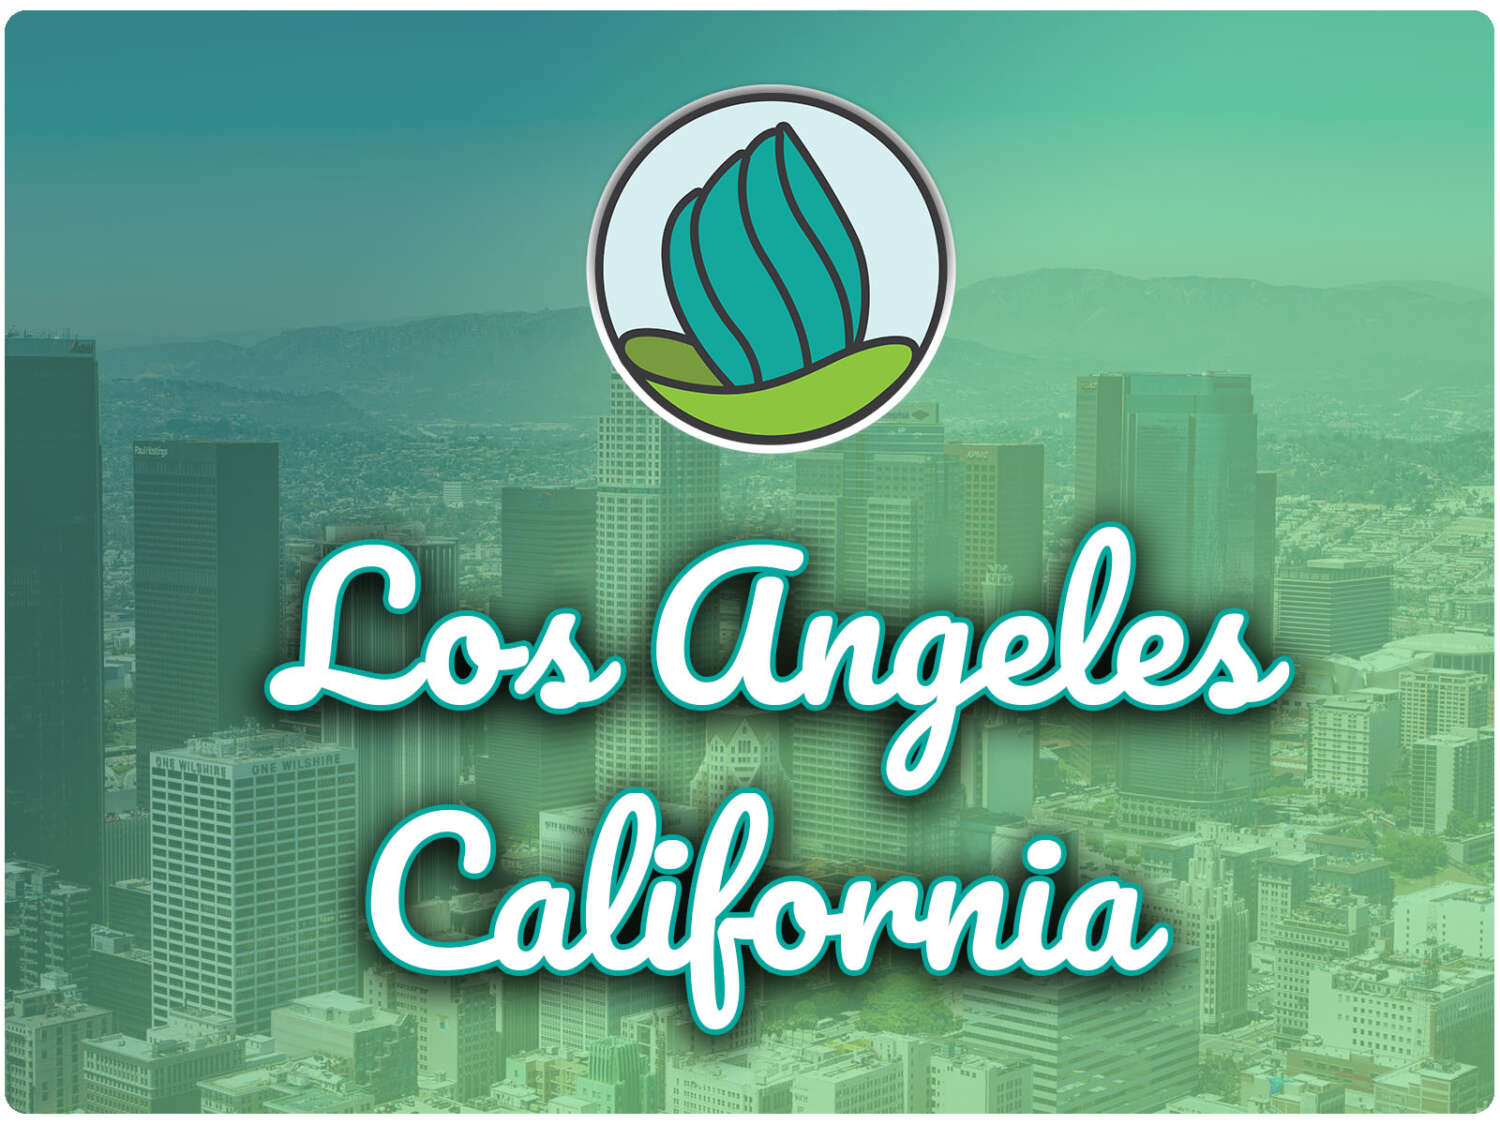 This image shows tall skyscrapers from the top in the background. In the top center, there is the logo of NDC and below there is the text " Los Angeles California"